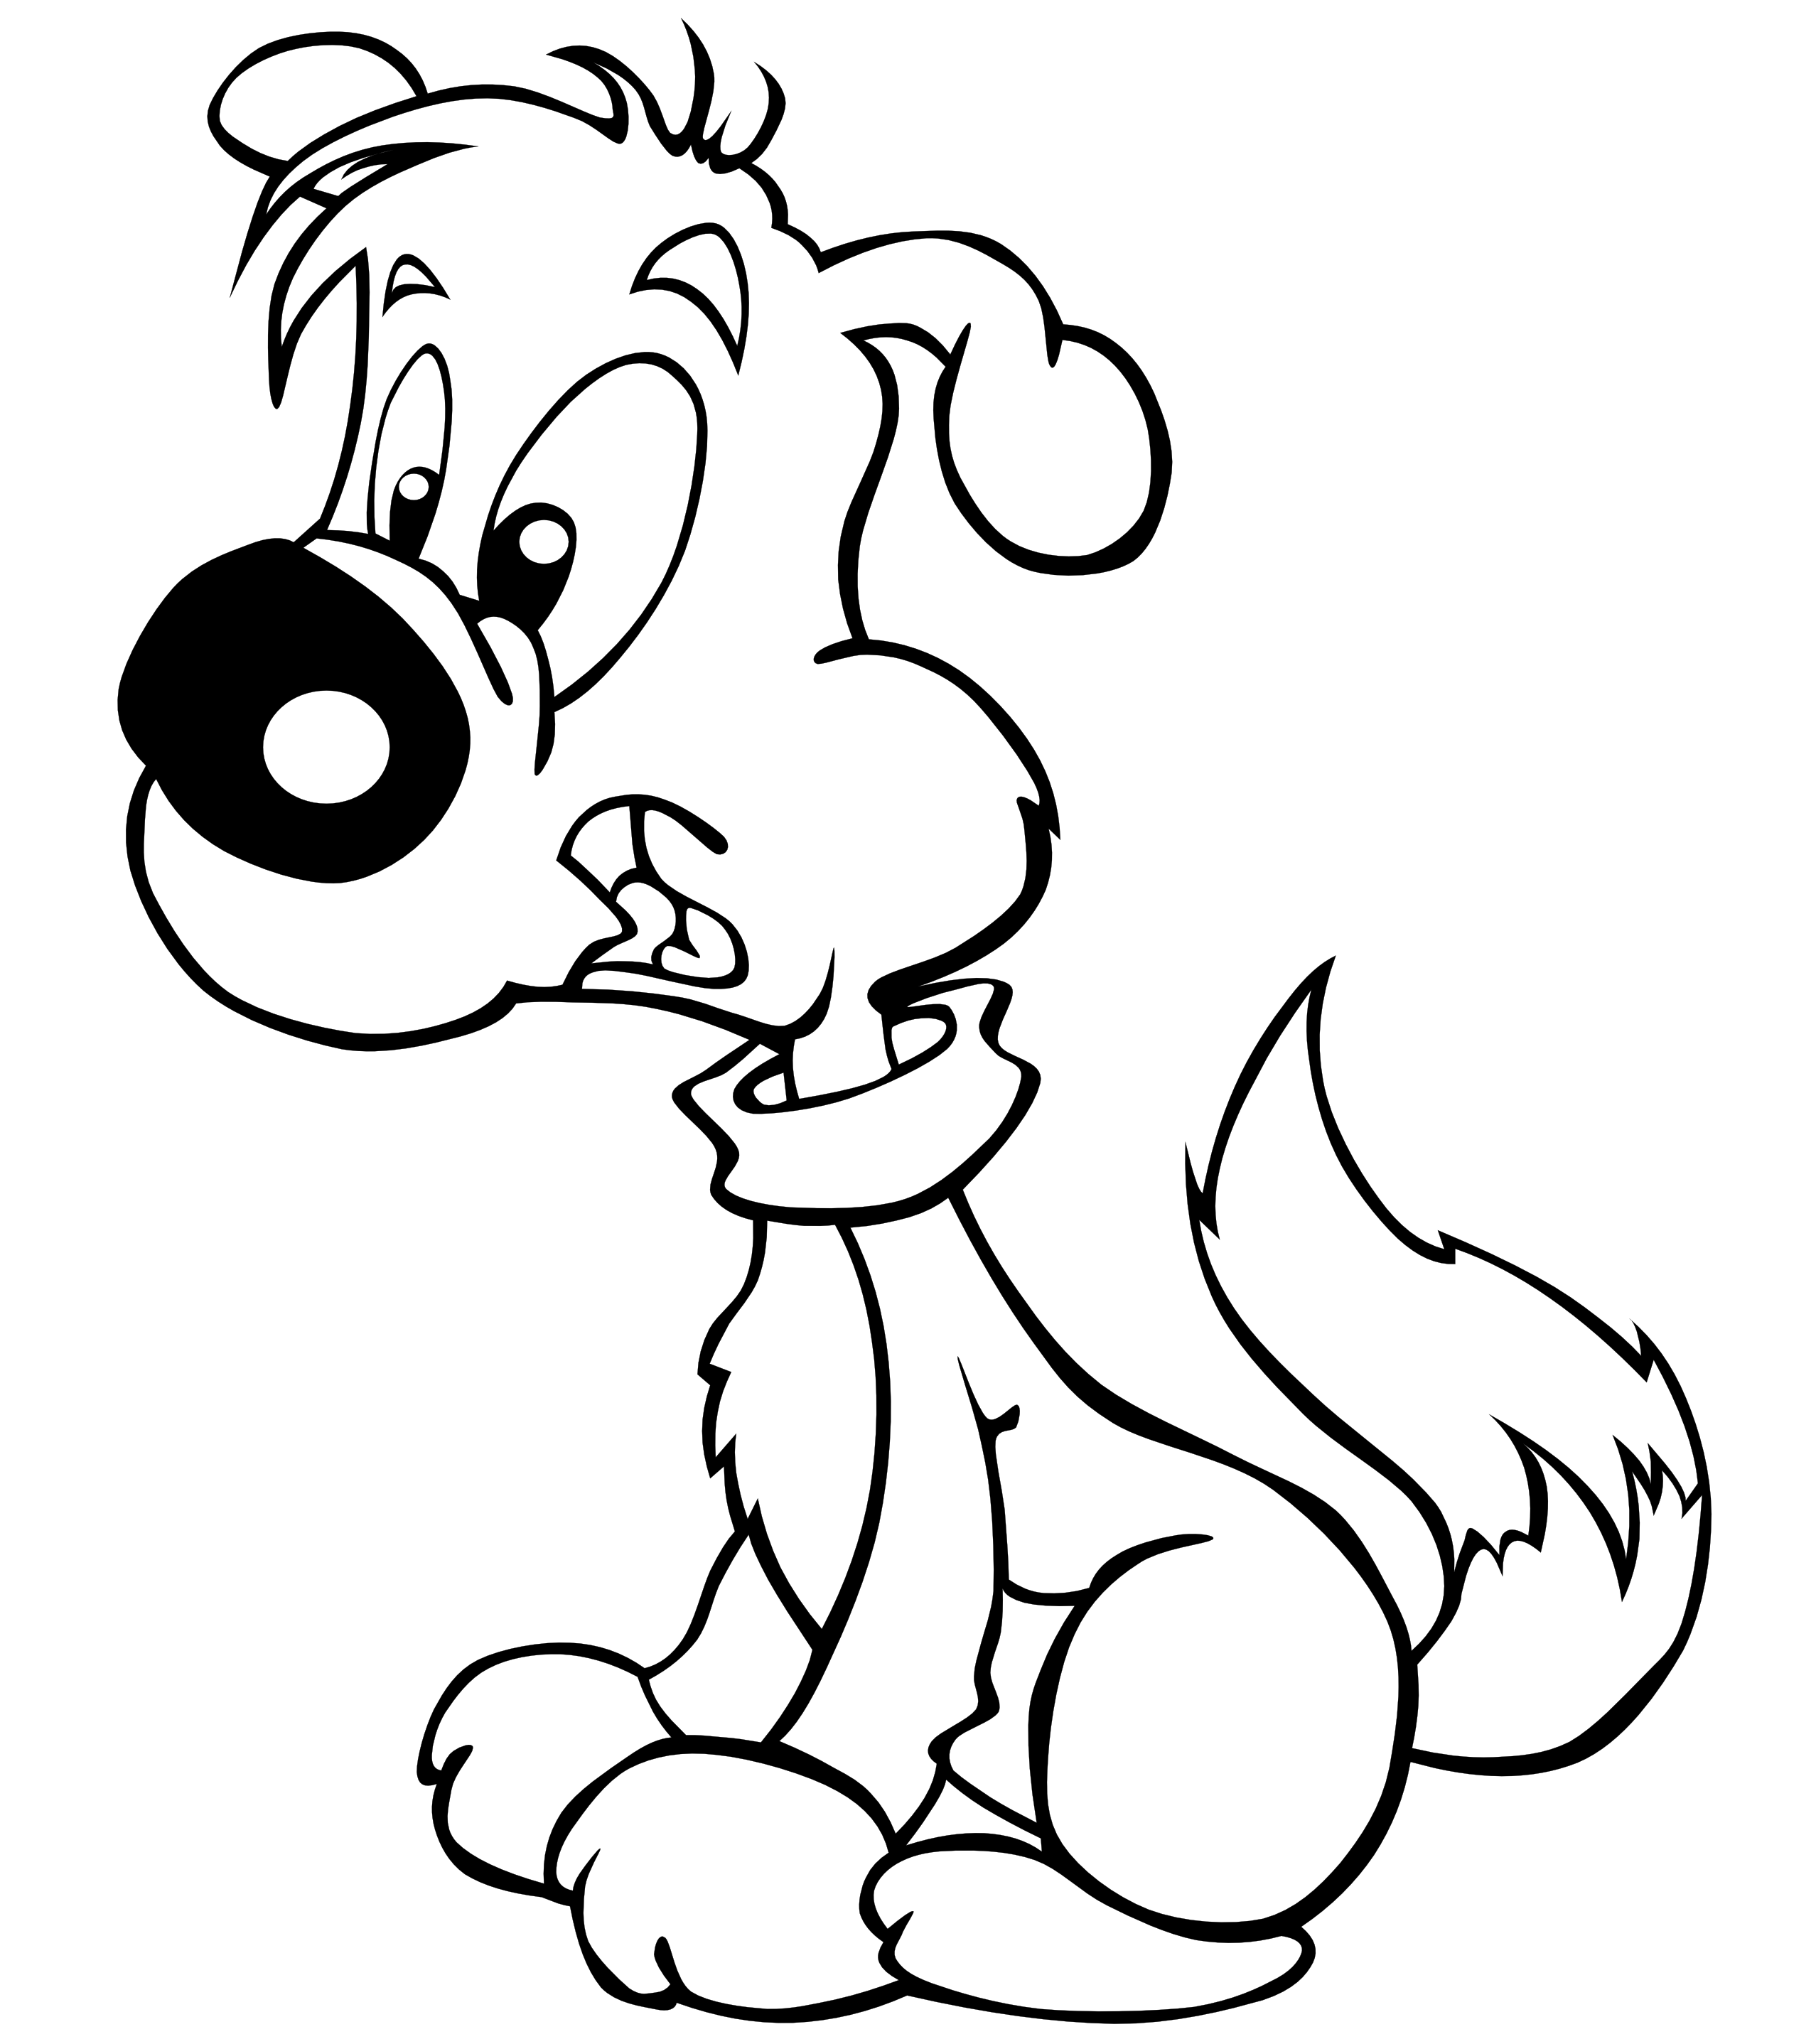 Black And White Cartoon Pic - ClipArt Best